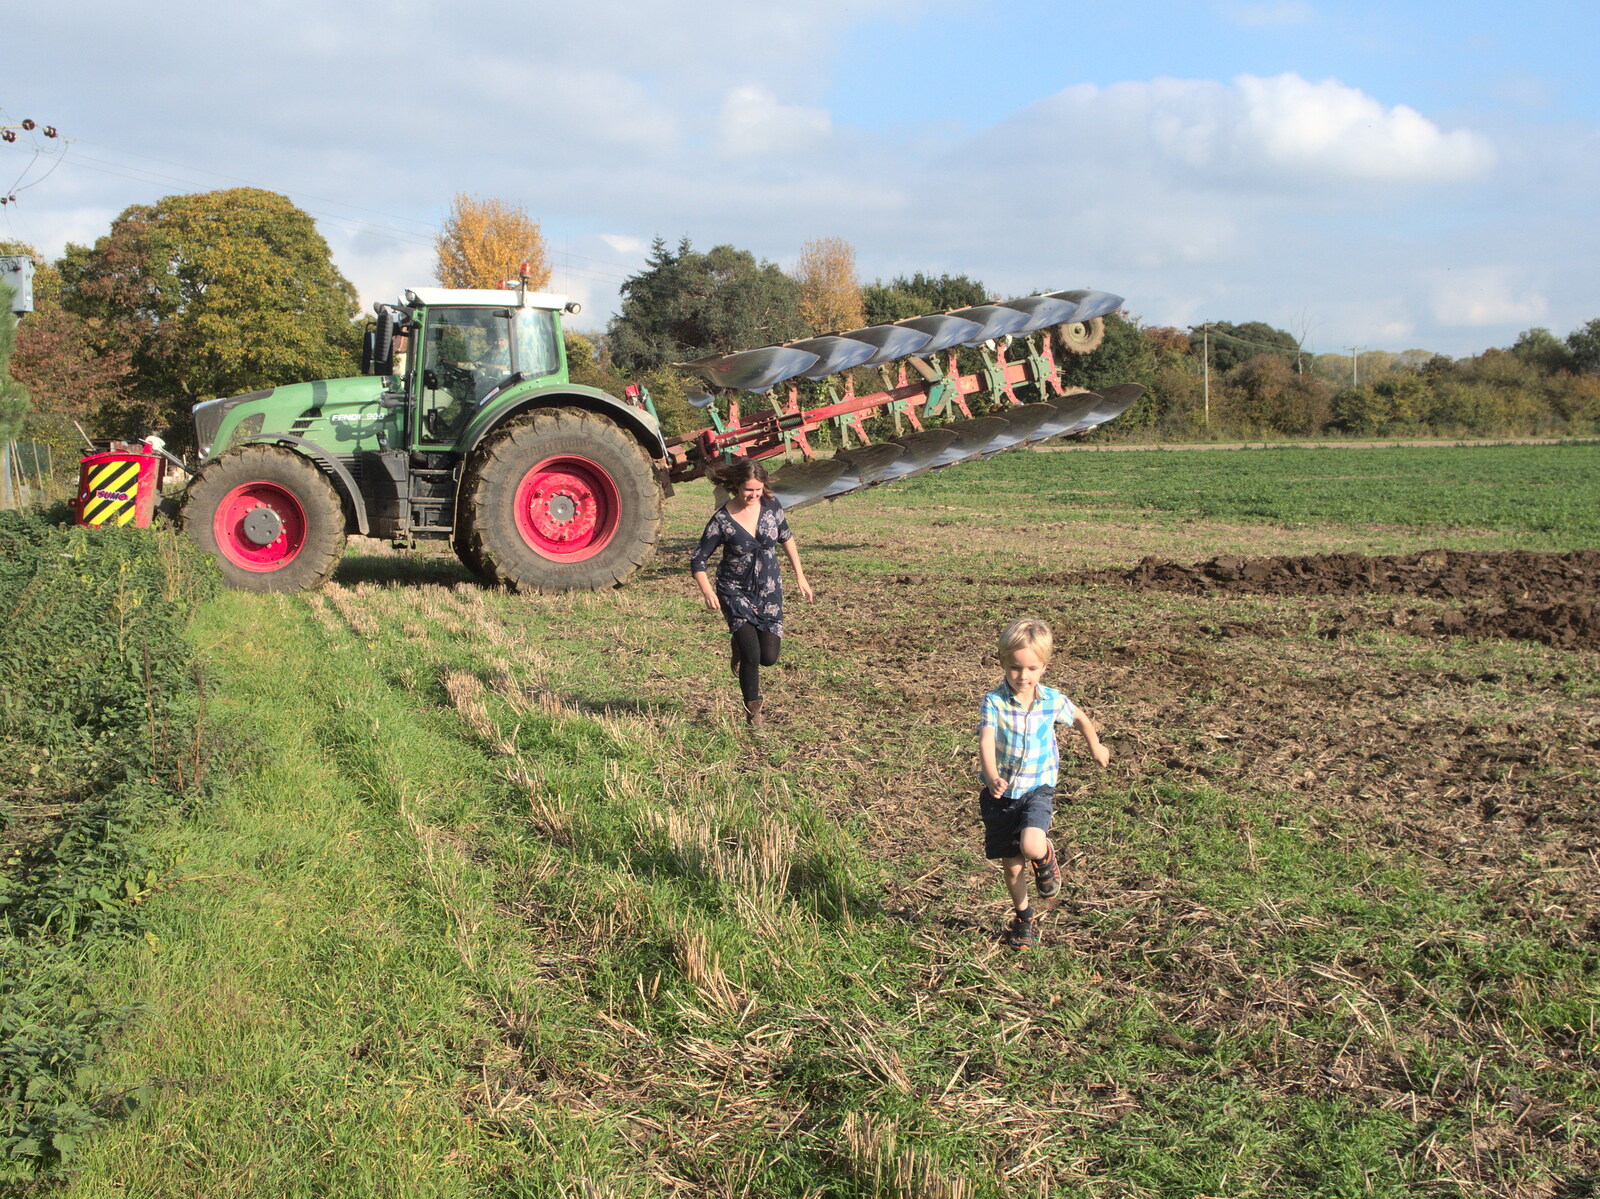 Harry runs back from his trip from Tractor Rides and Pub Cellars, Brome, Suffolk - 29th October 2016